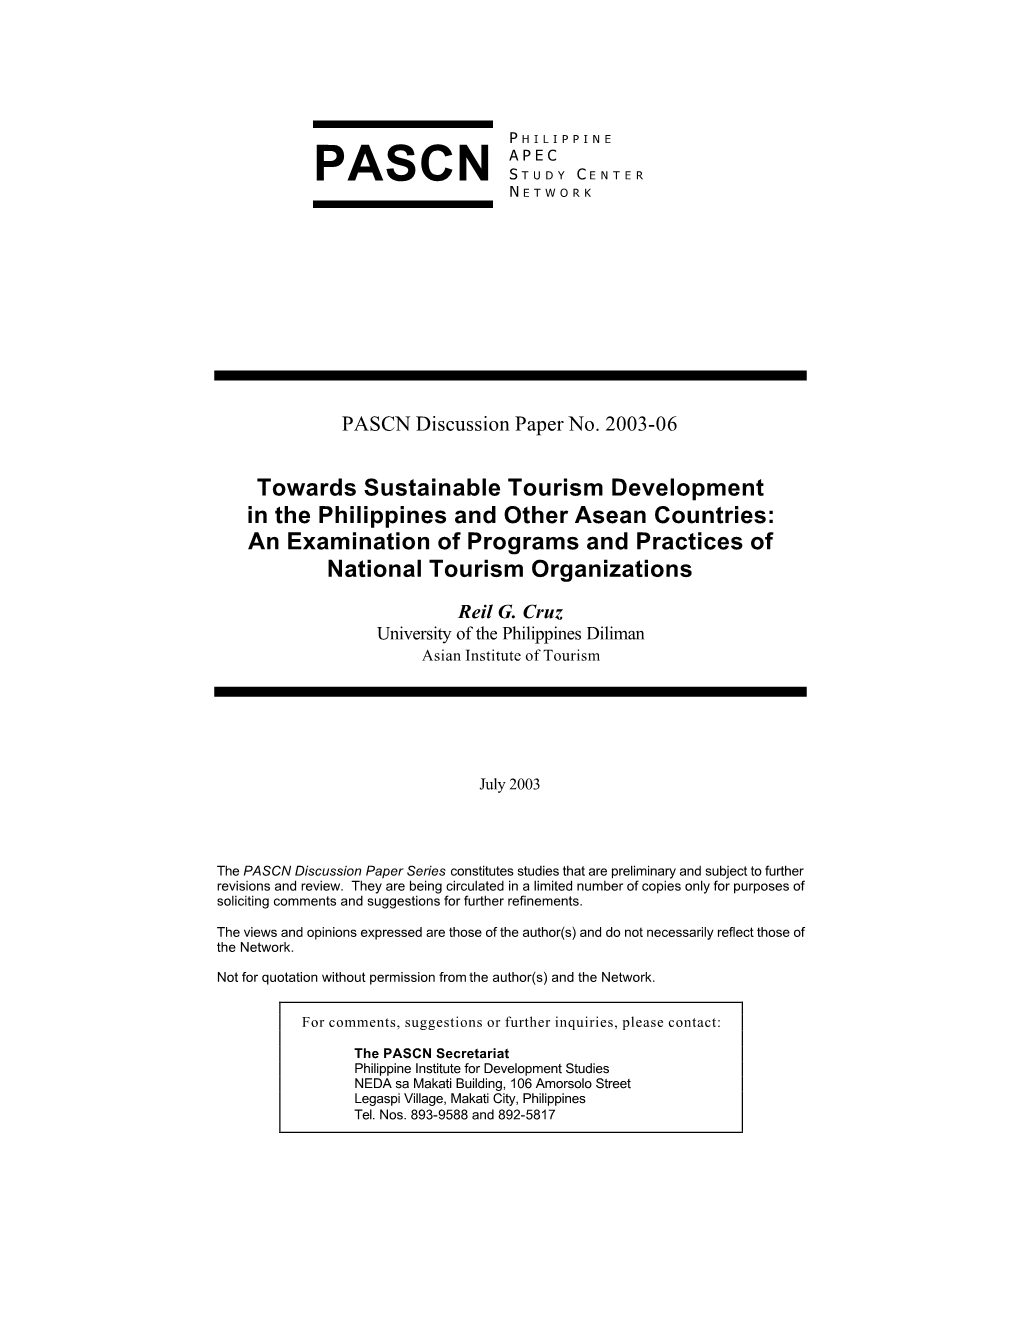 Towards Sustainable Tourism Development in the Philippines and Other Asean Countries: an Examination of Programs and Practices of National Tourism Organizations